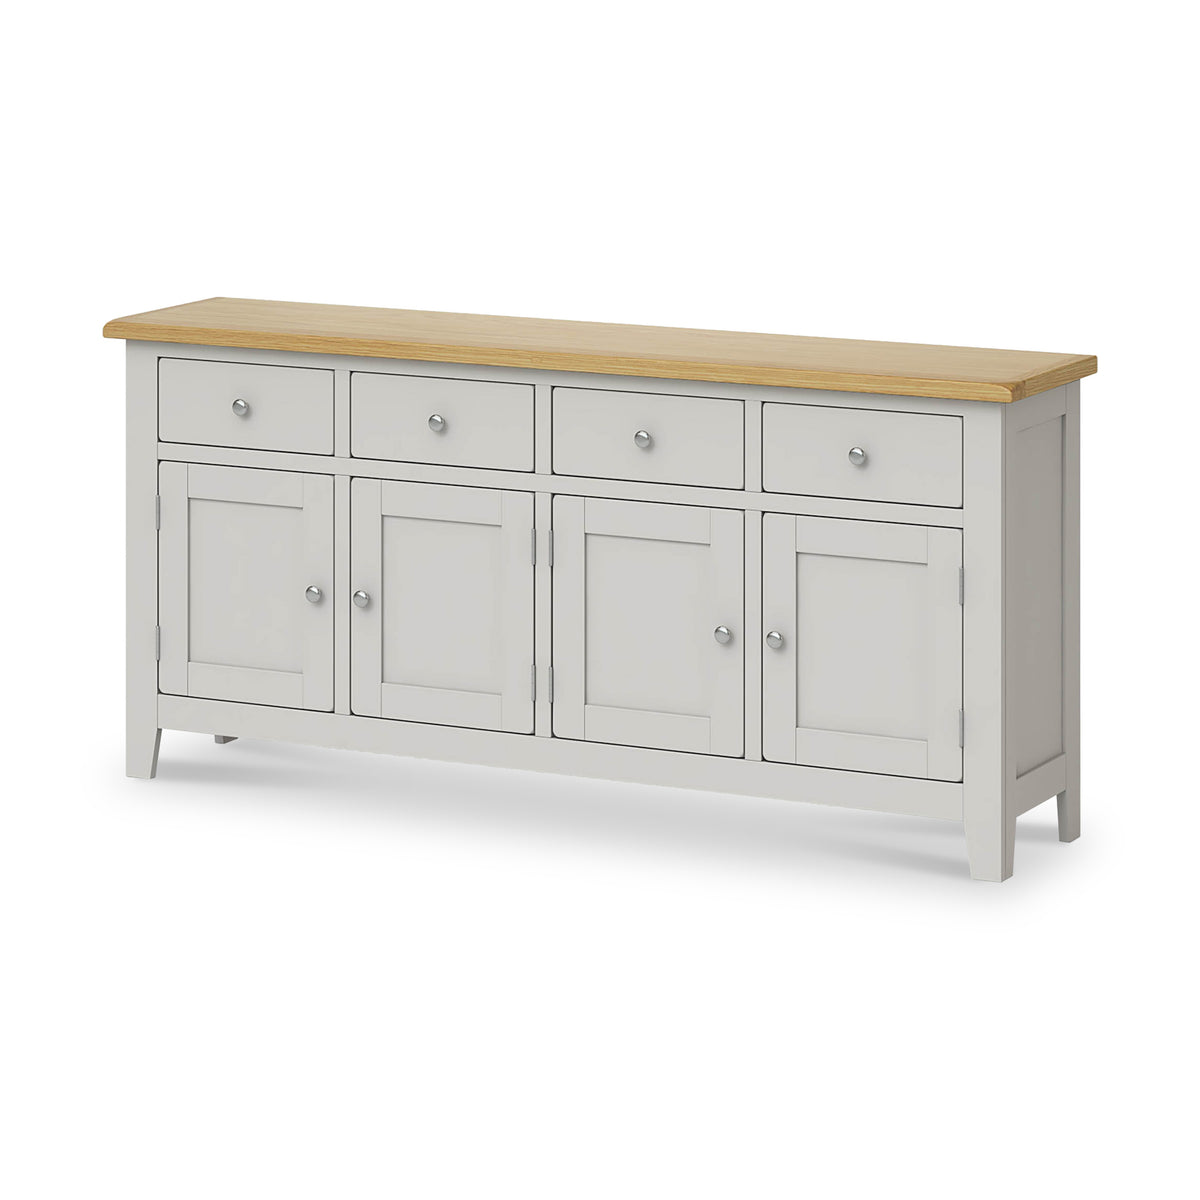 Lundy Grey Extra Large Sideboard from Roseland Furniture